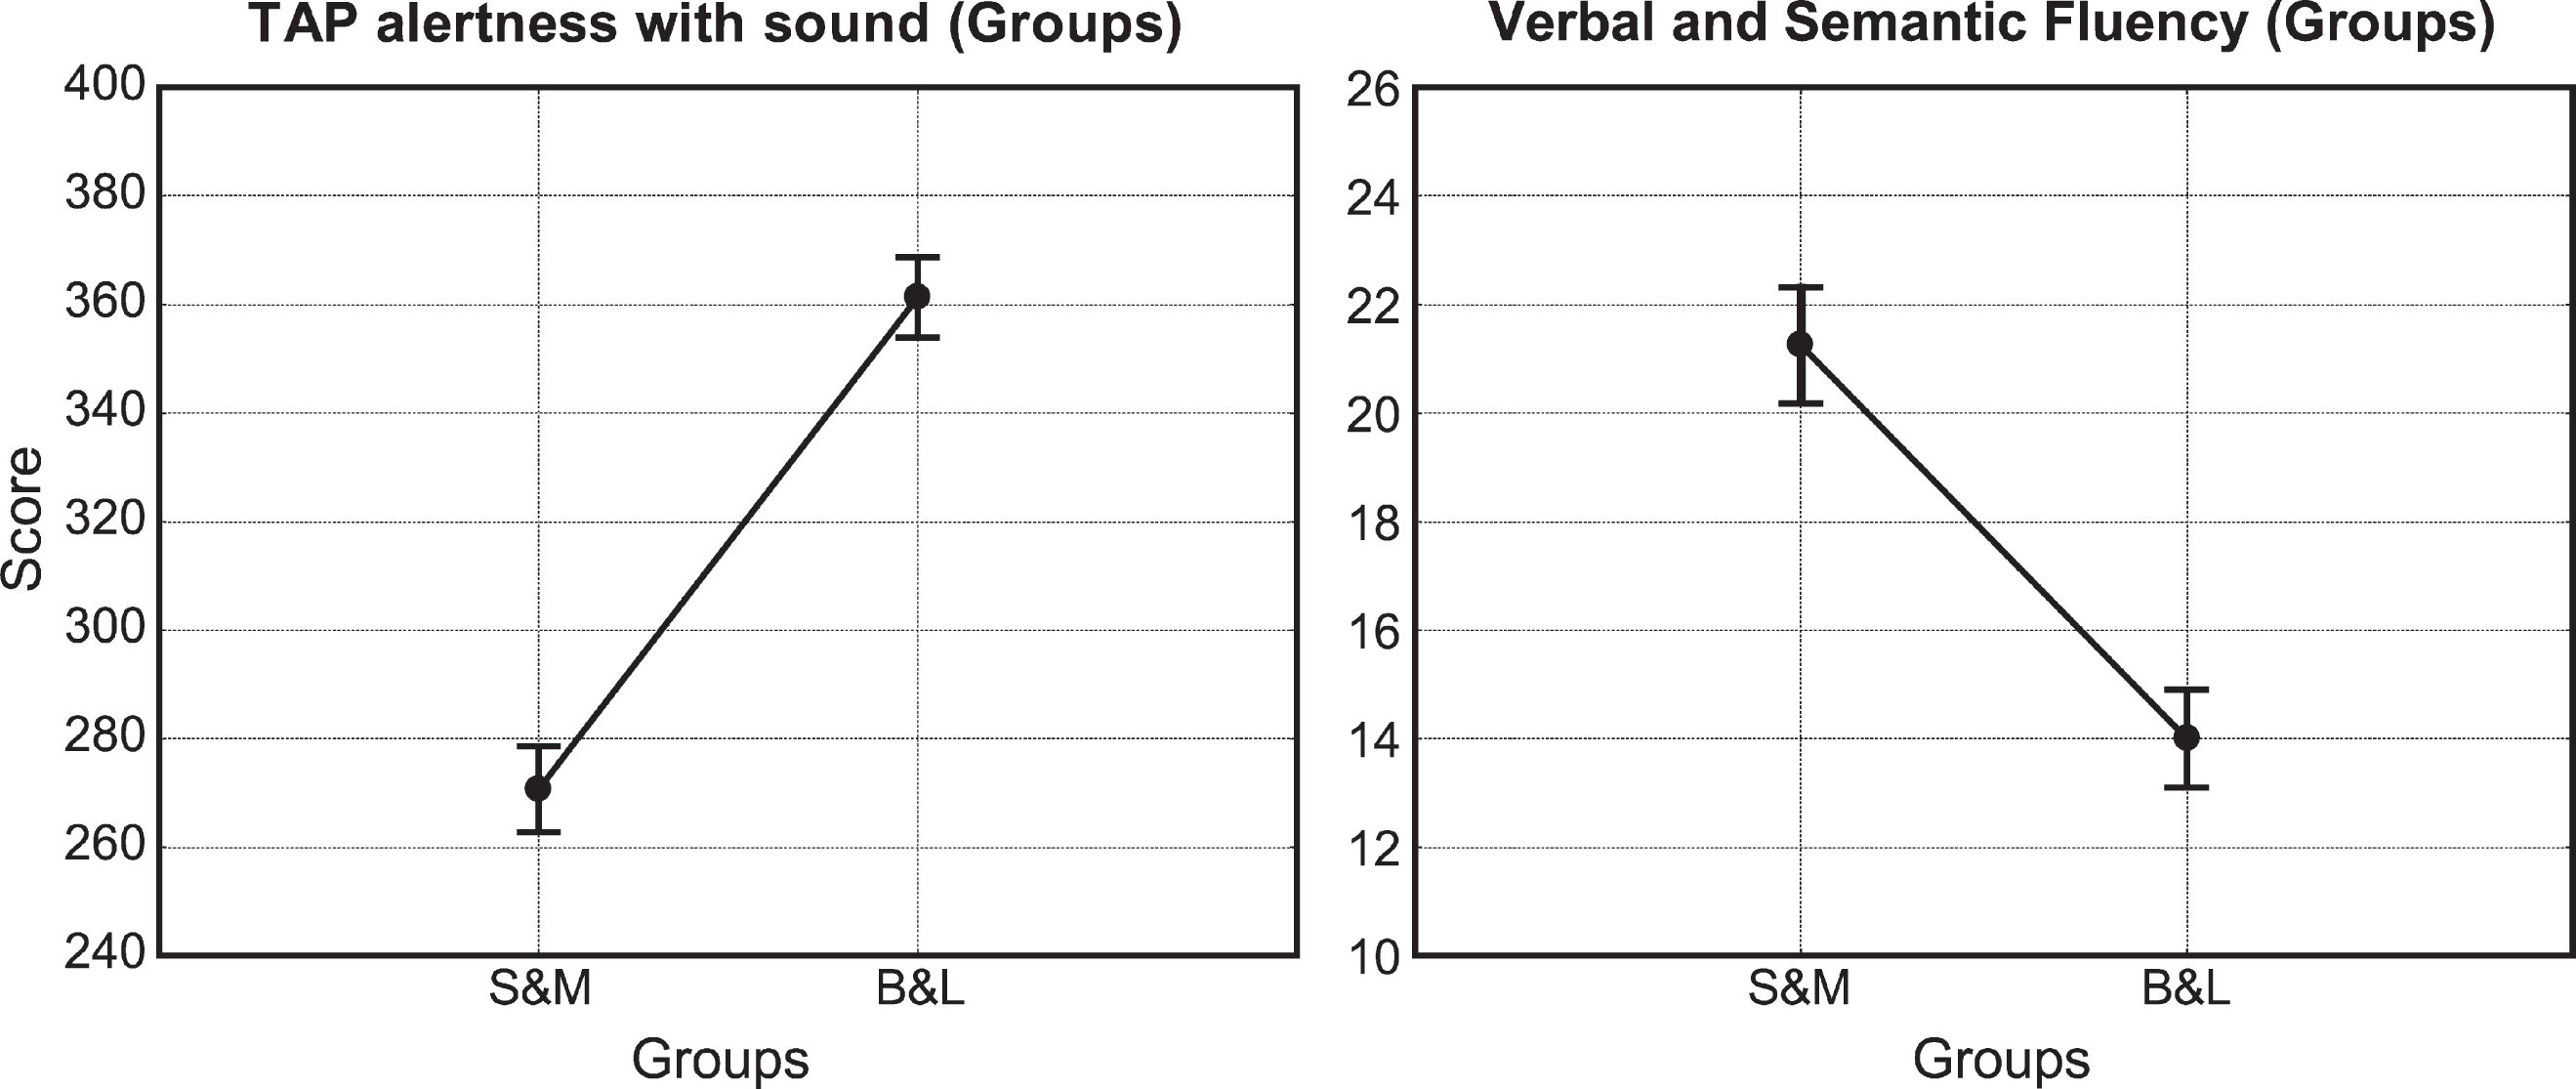 Neuropsychological data. Graphical representation of the most important Table 3 significant results. The vertical bars represent +/–standard error. On the left: significant main effect of “Groups” in TAP alertness with sound. The score is higher for B&L Group. On the right: significant main effect of “Groups” in Verbal and Semantic Fluency. The score is higher for S&M Group.